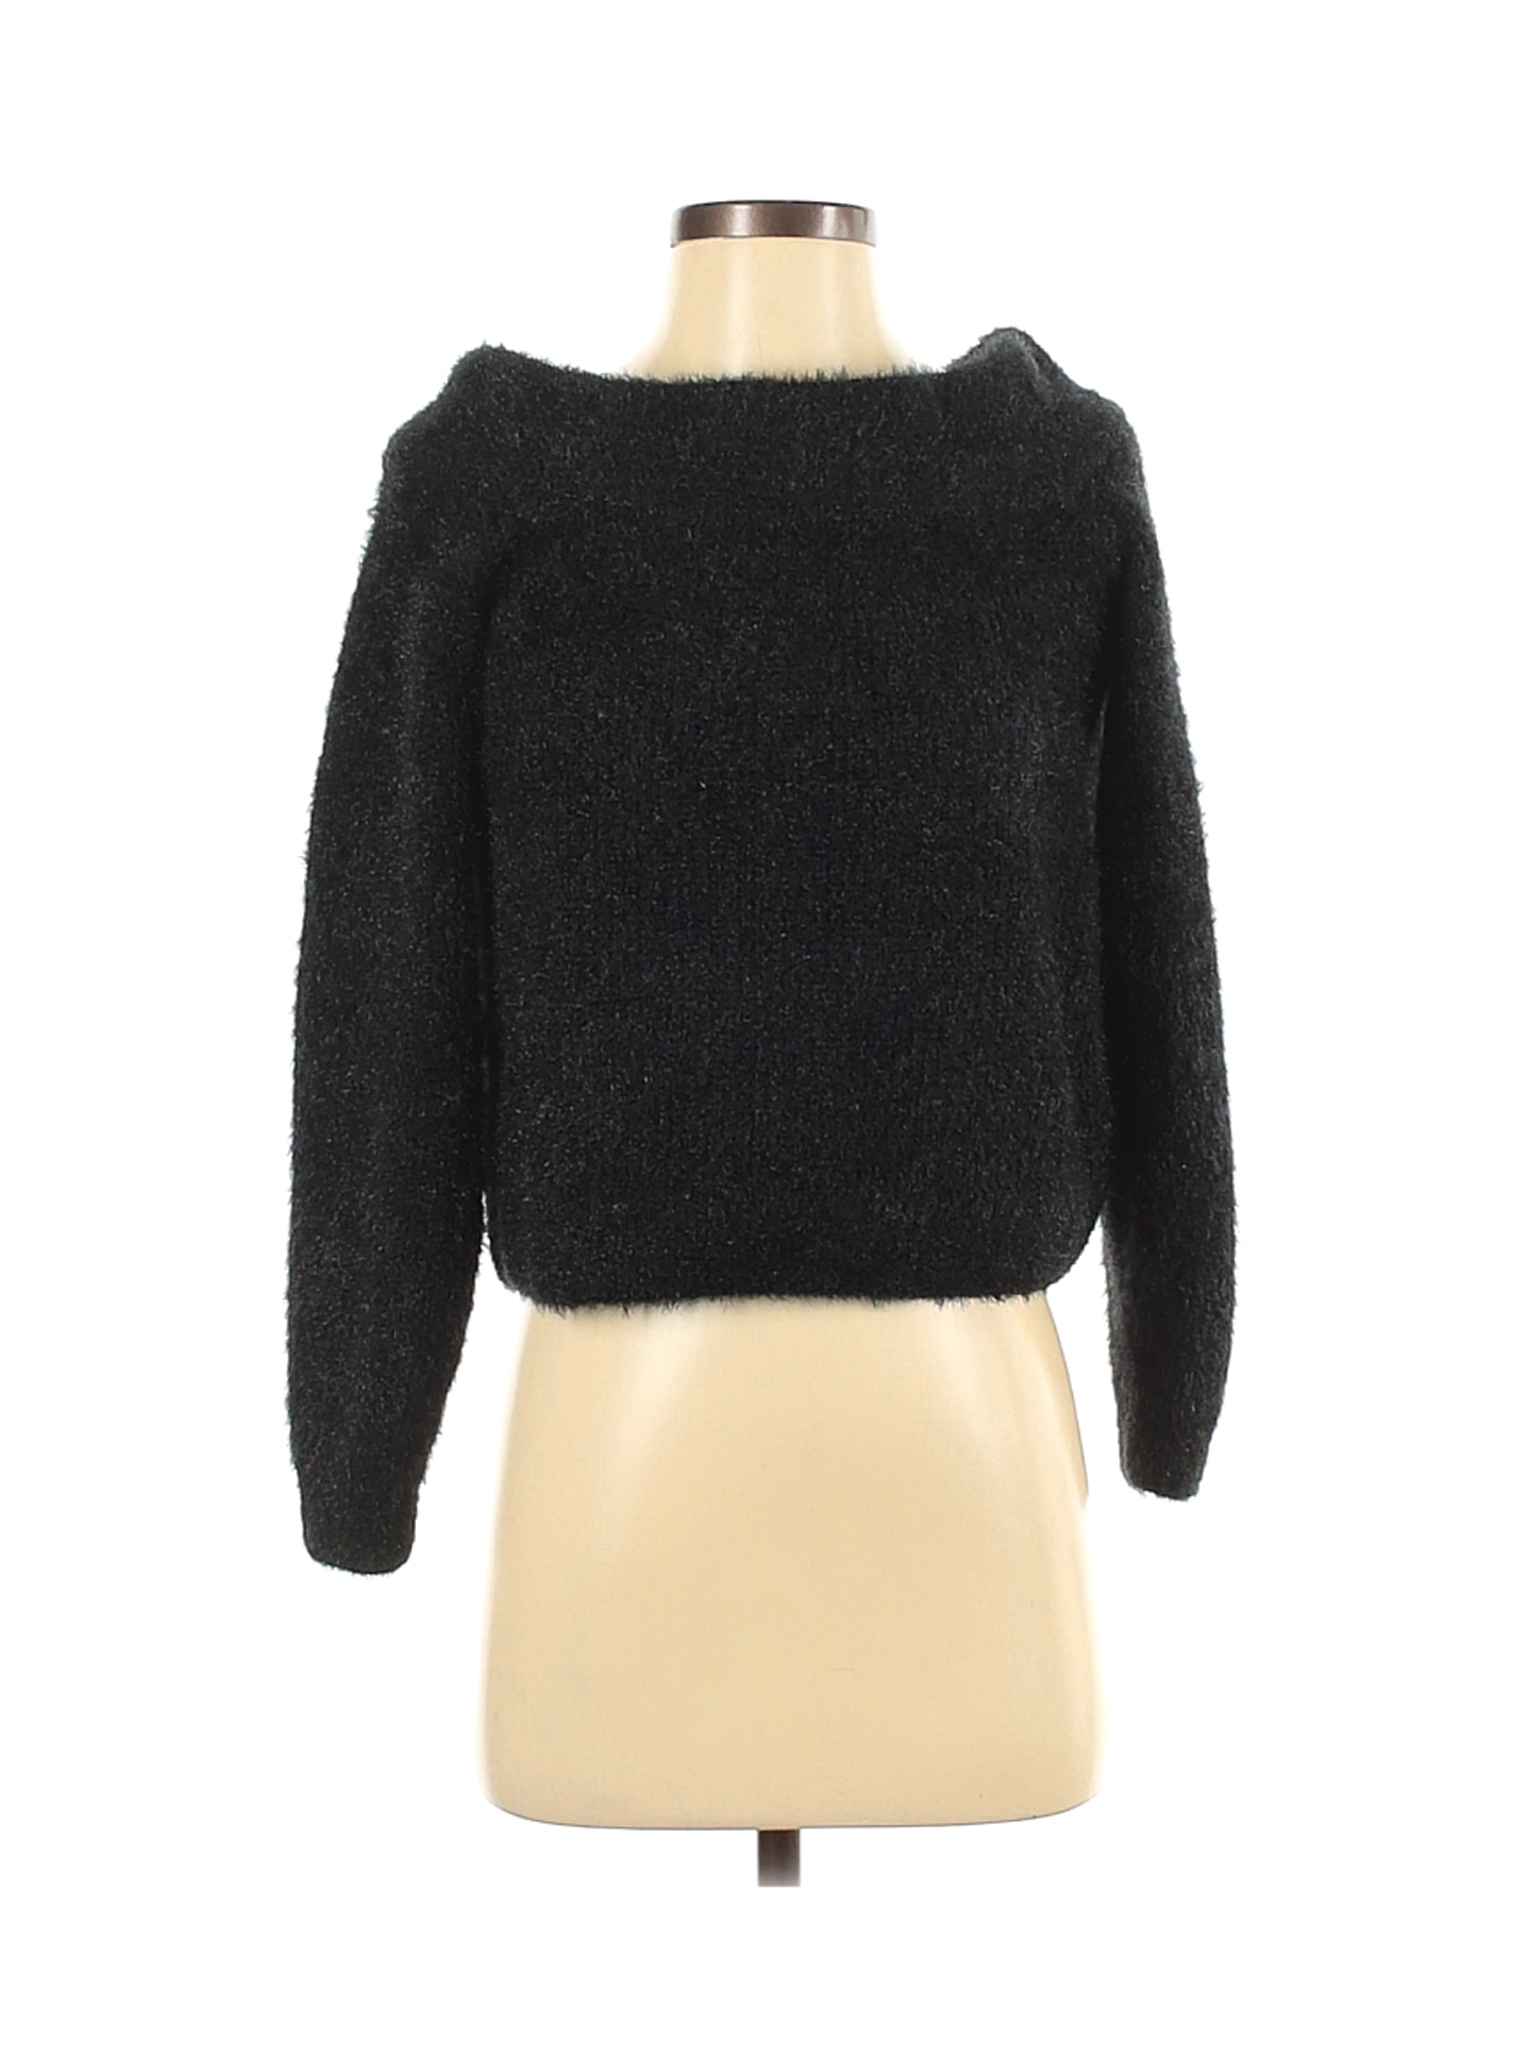 Divided by H&M Women Black Pullover Sweater S | eBay